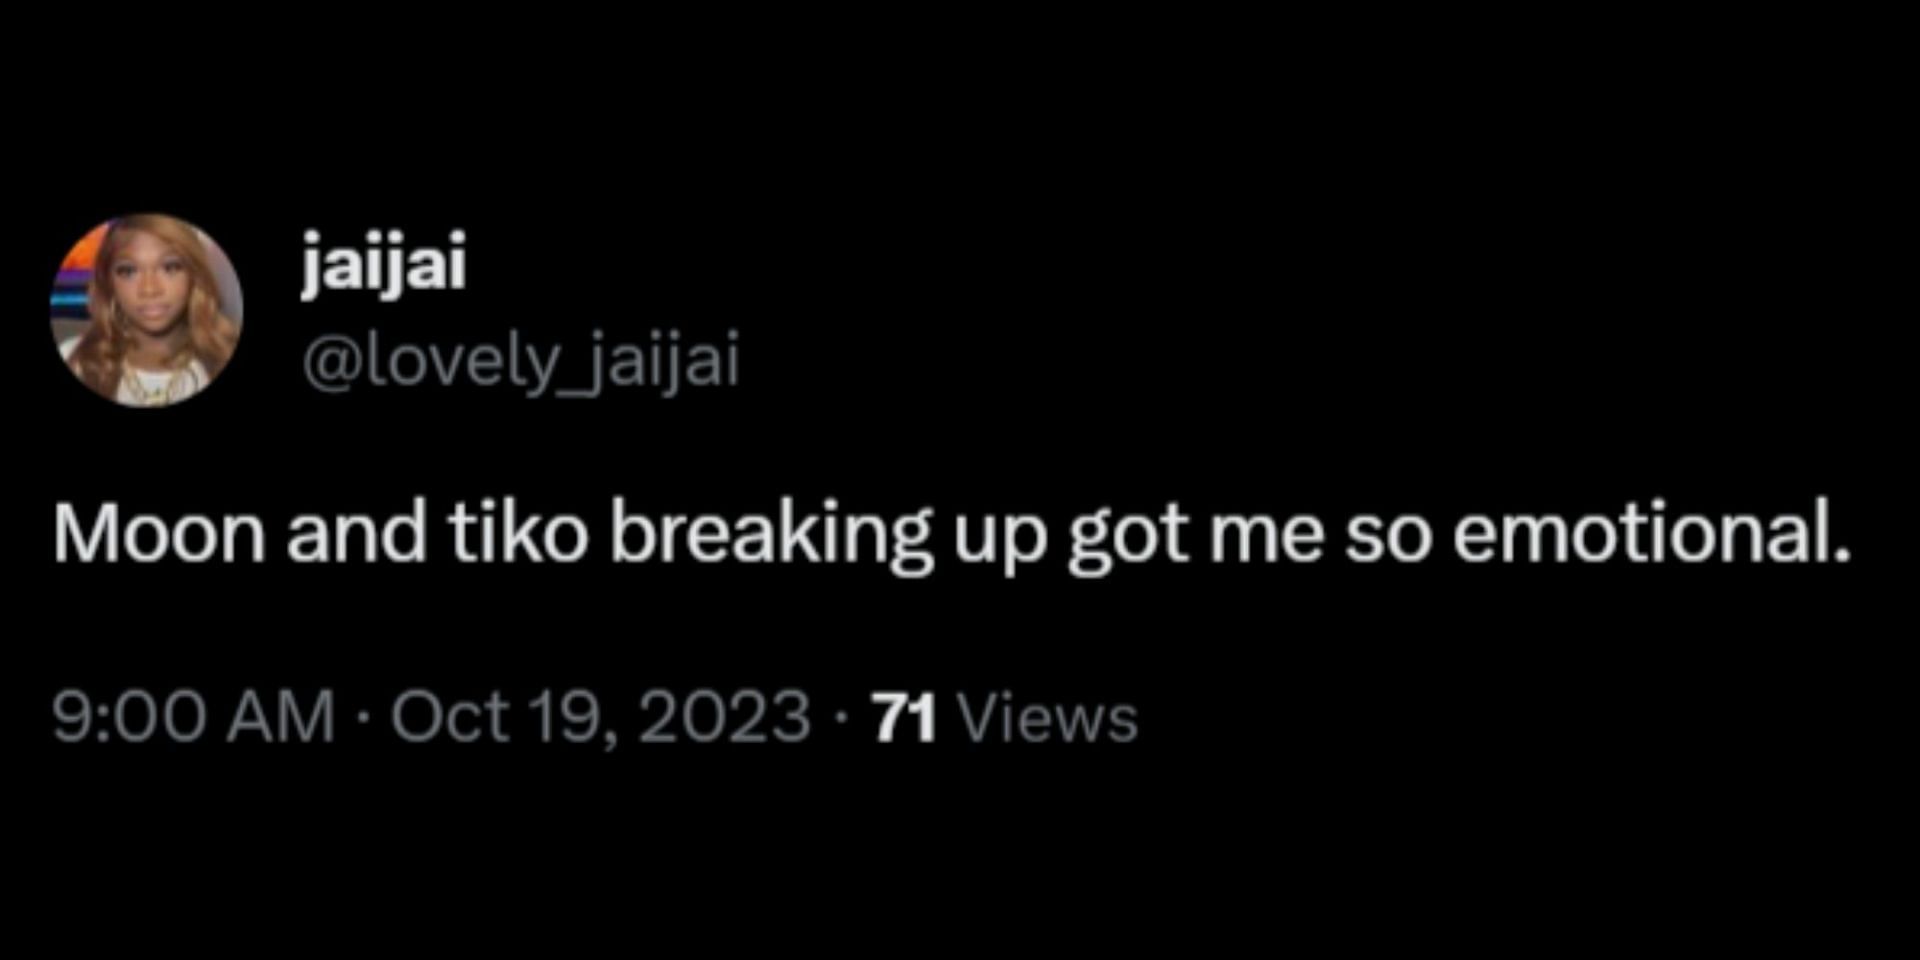 Fans react to @moontellthat&#039;s breakup announcement with husband Tiko. (Image via X/@lovely_jaijai)